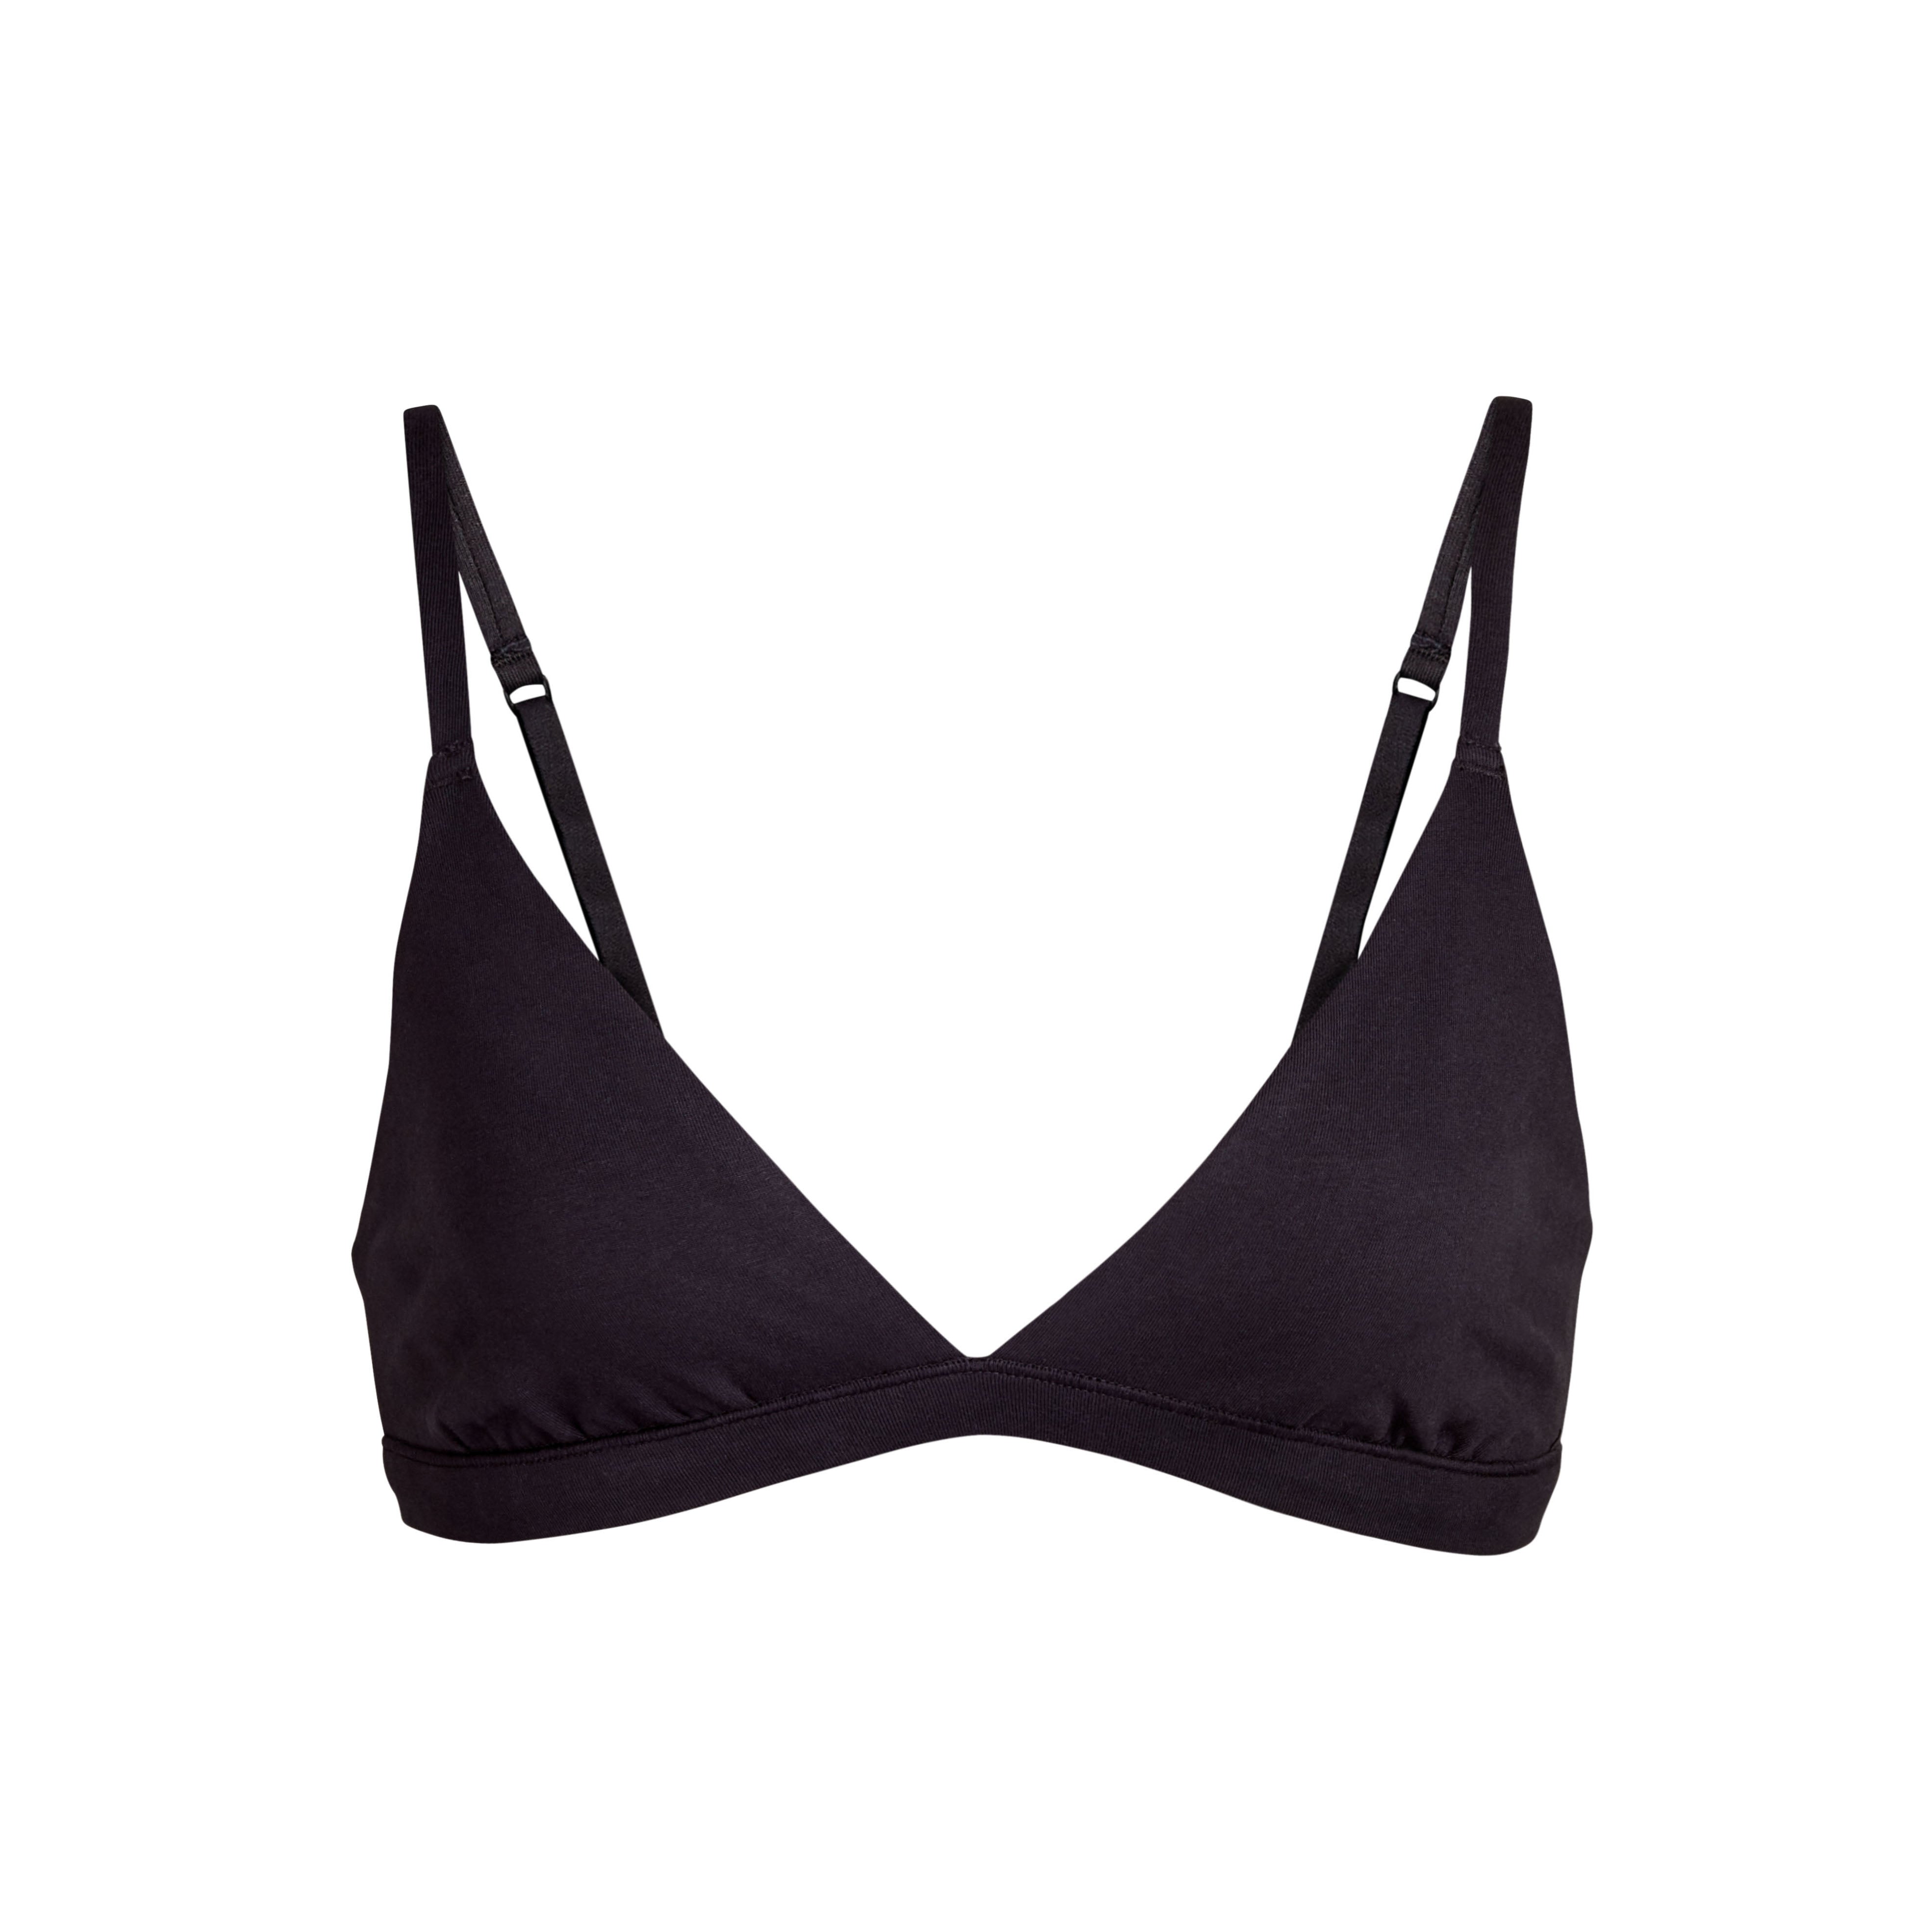 COTTON TRIANGLE BRALETTE | SOOT - COTTON TRIANGLE BRALETTE | SOOT